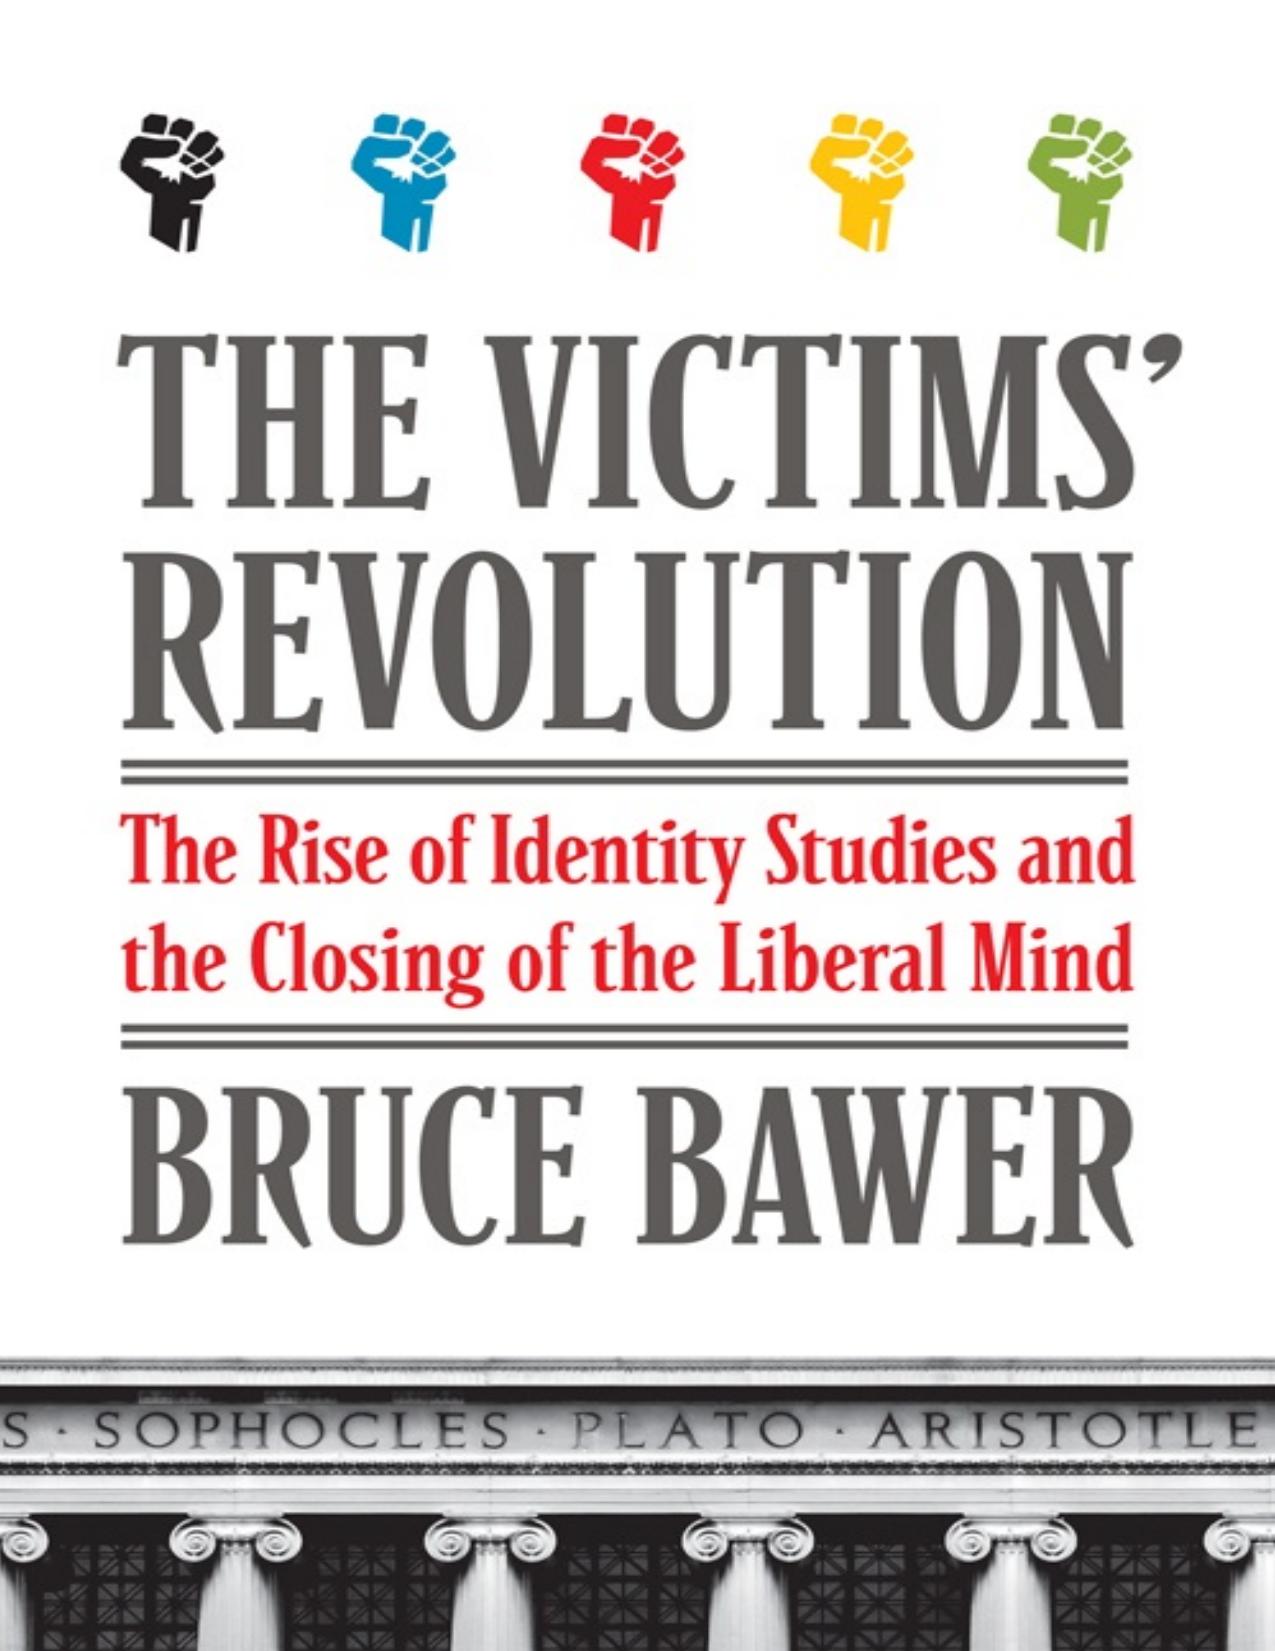 The Victims' Revolution: The Rise of Identity Studies and the Closing of the Liberal Mind by Bruce Bawer